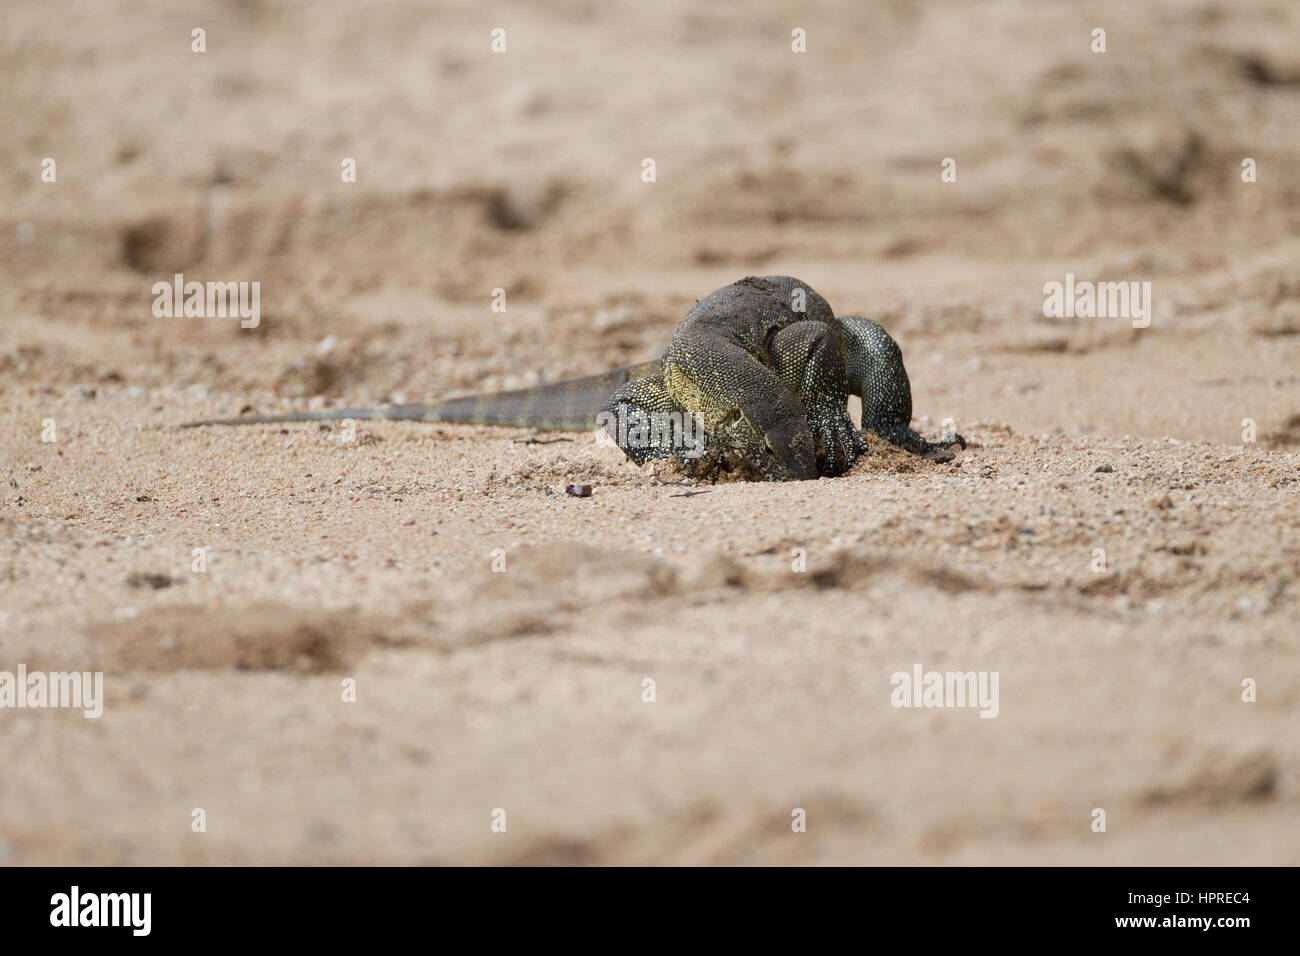 A monitor lizard or leguan, Varanus niloticus, explores a dry riverbed is search of food in Kruger National Park, South Africa. Stock Photo